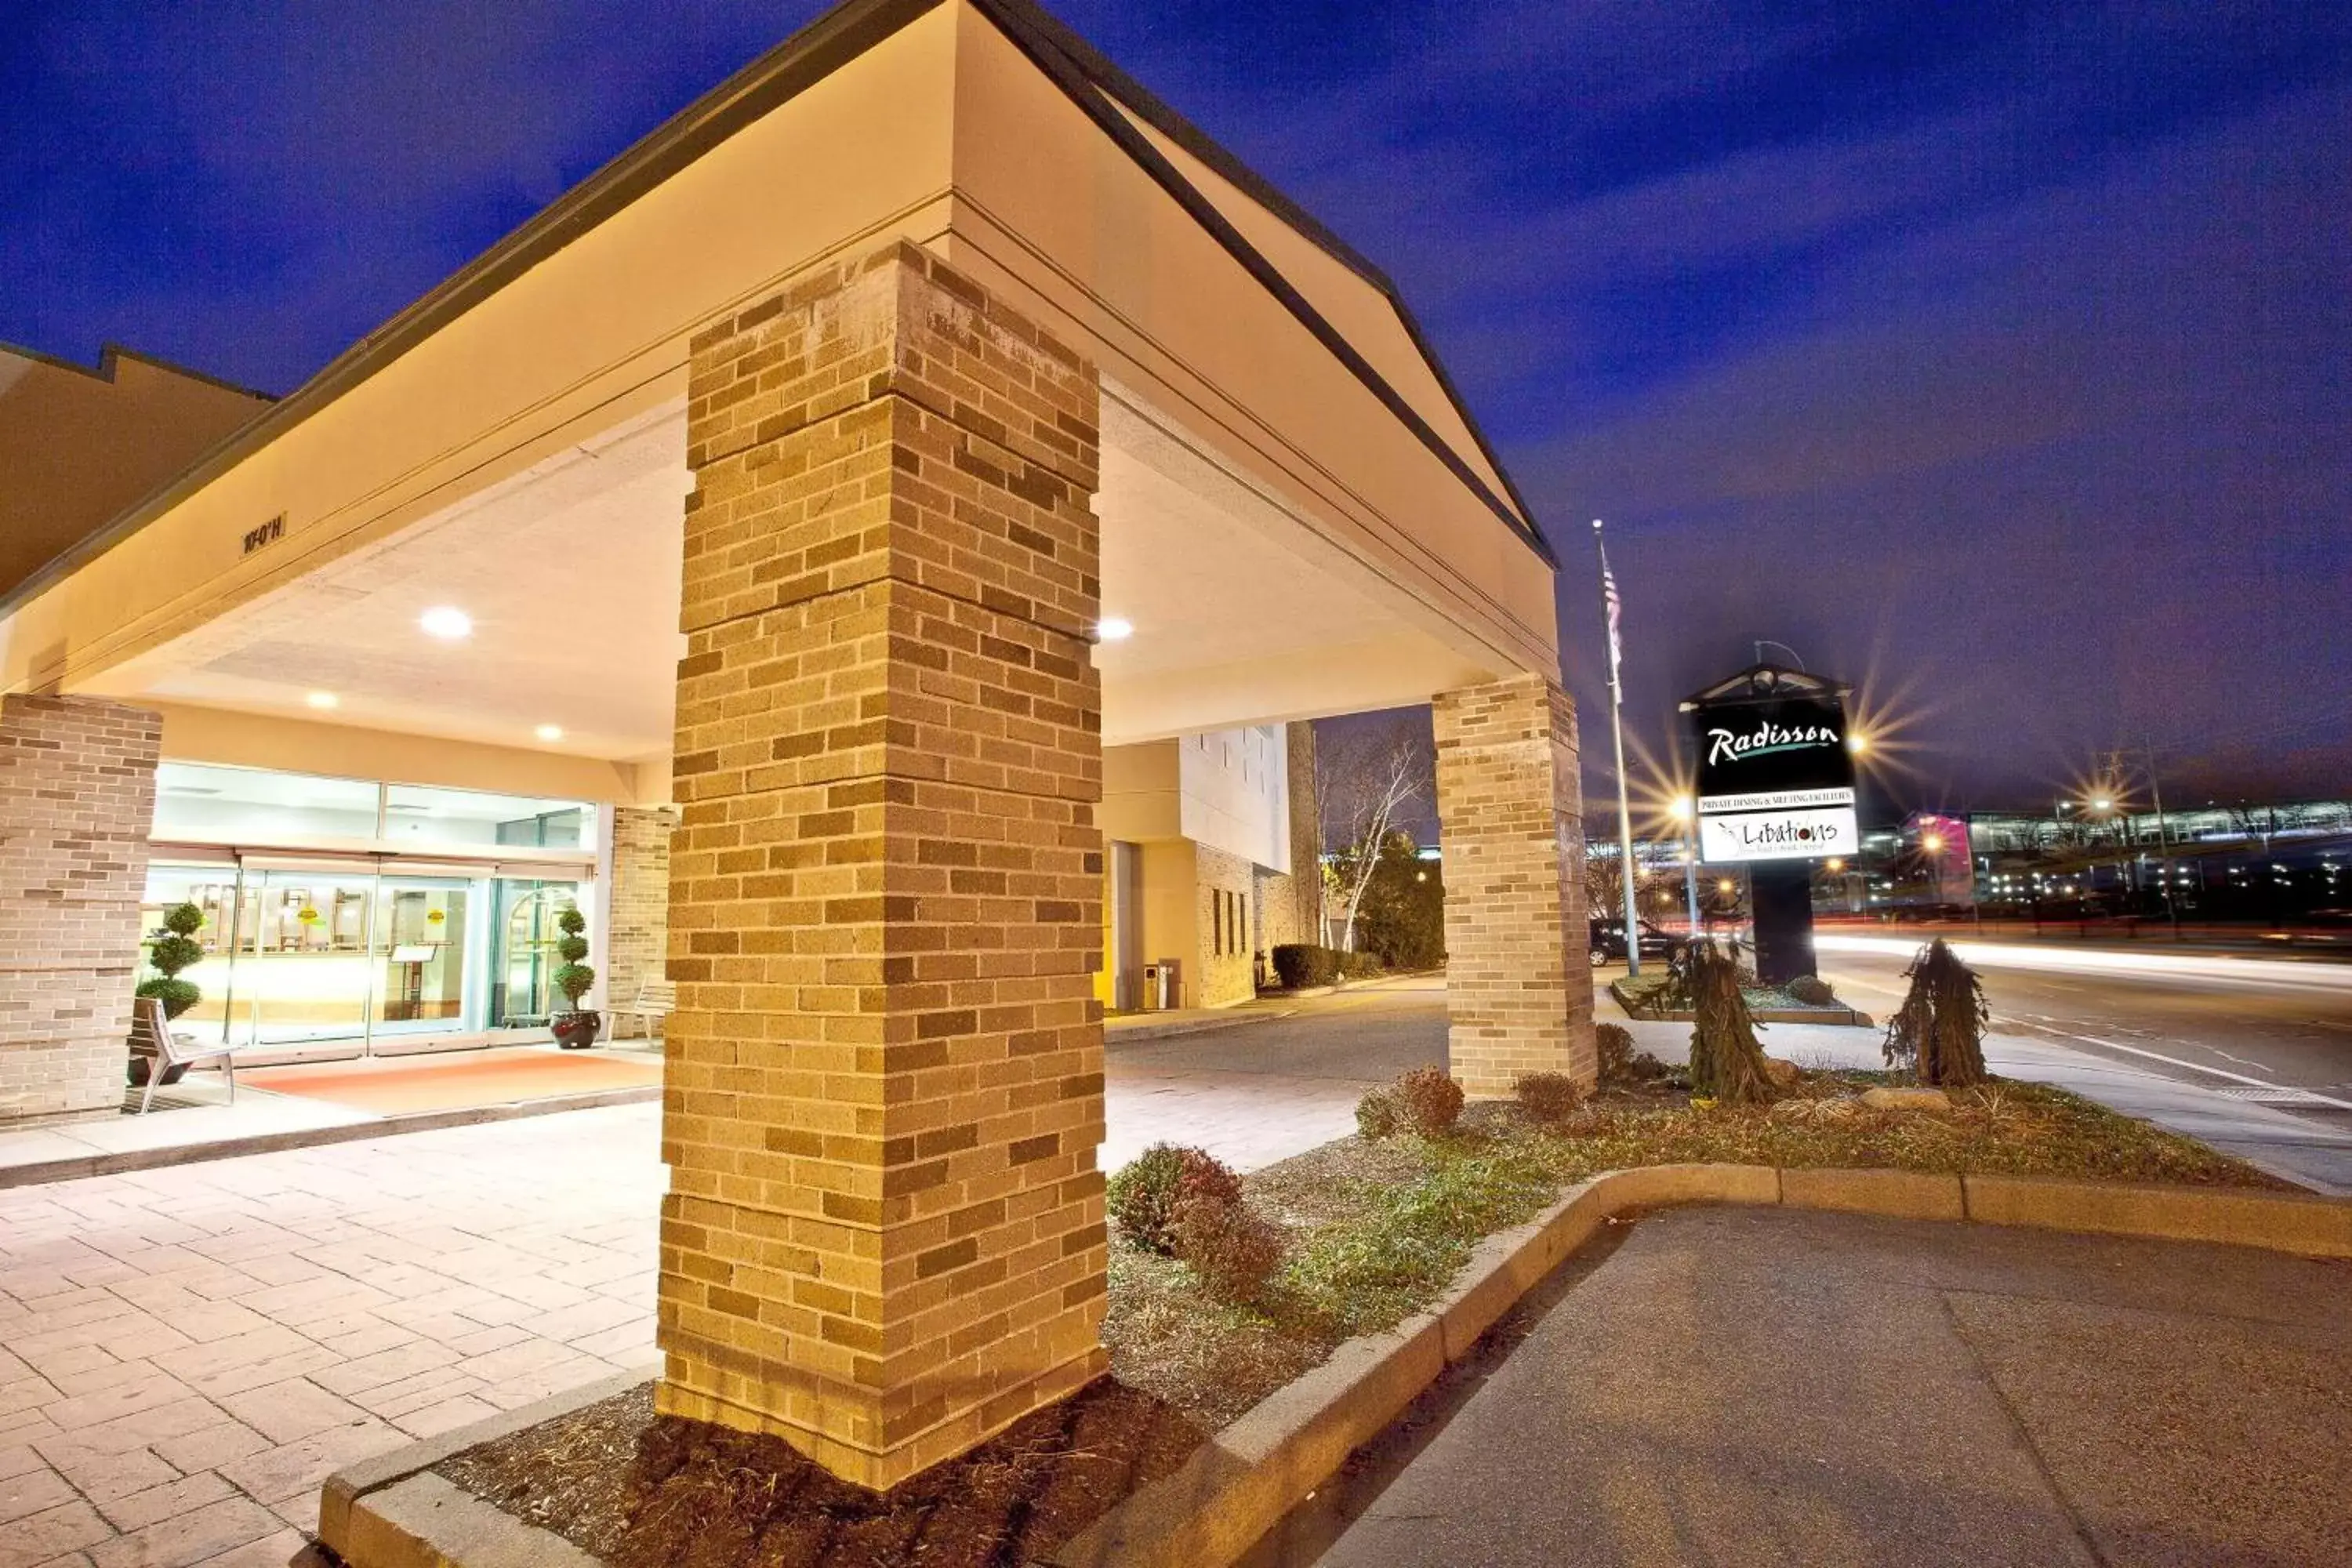 Property building in Radisson Hotel Providence Airport